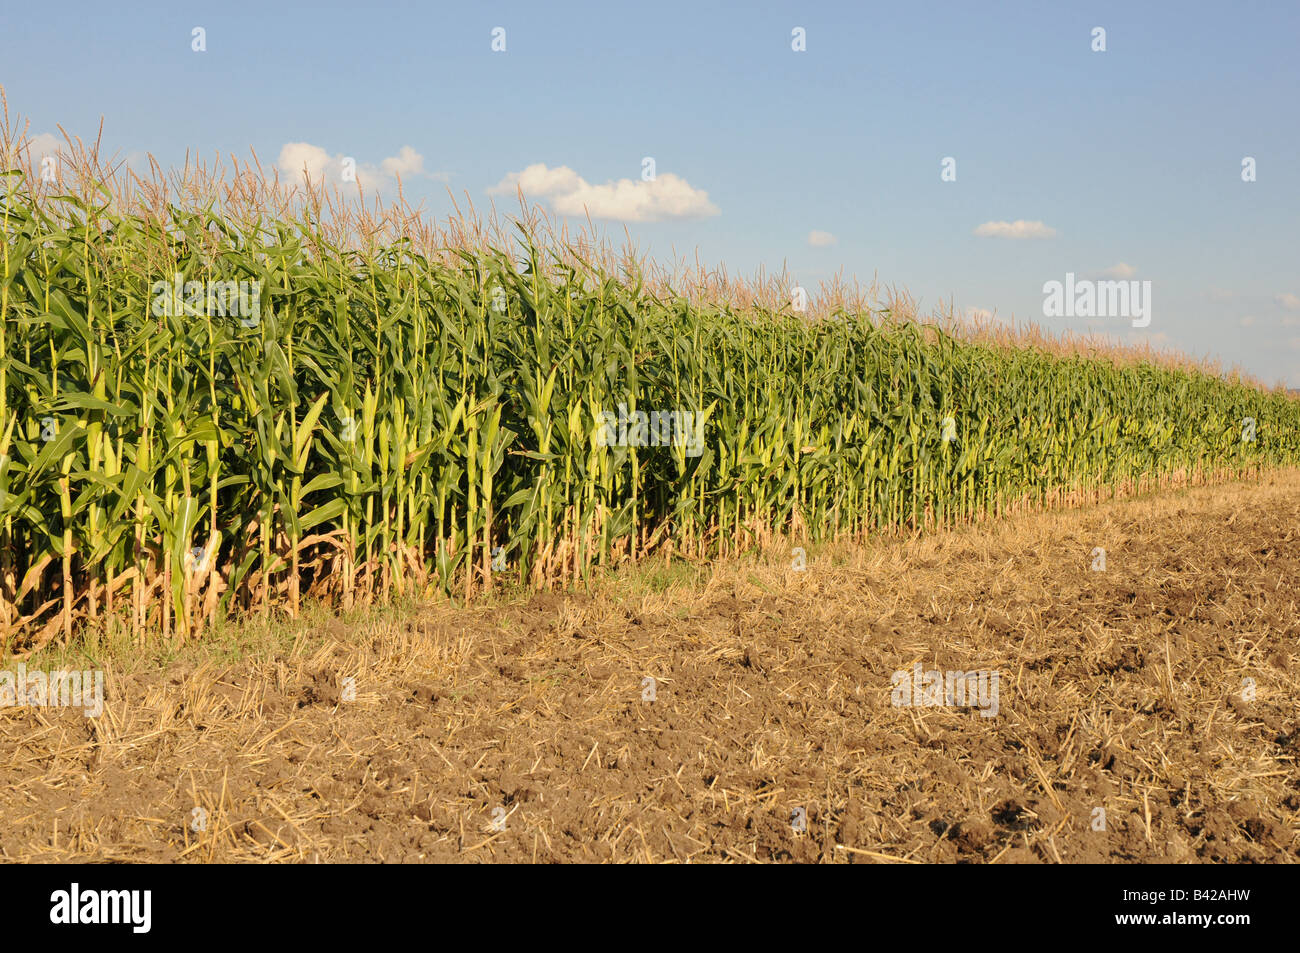 Rows of maize plants on a field with blue sky above. Stock Photo